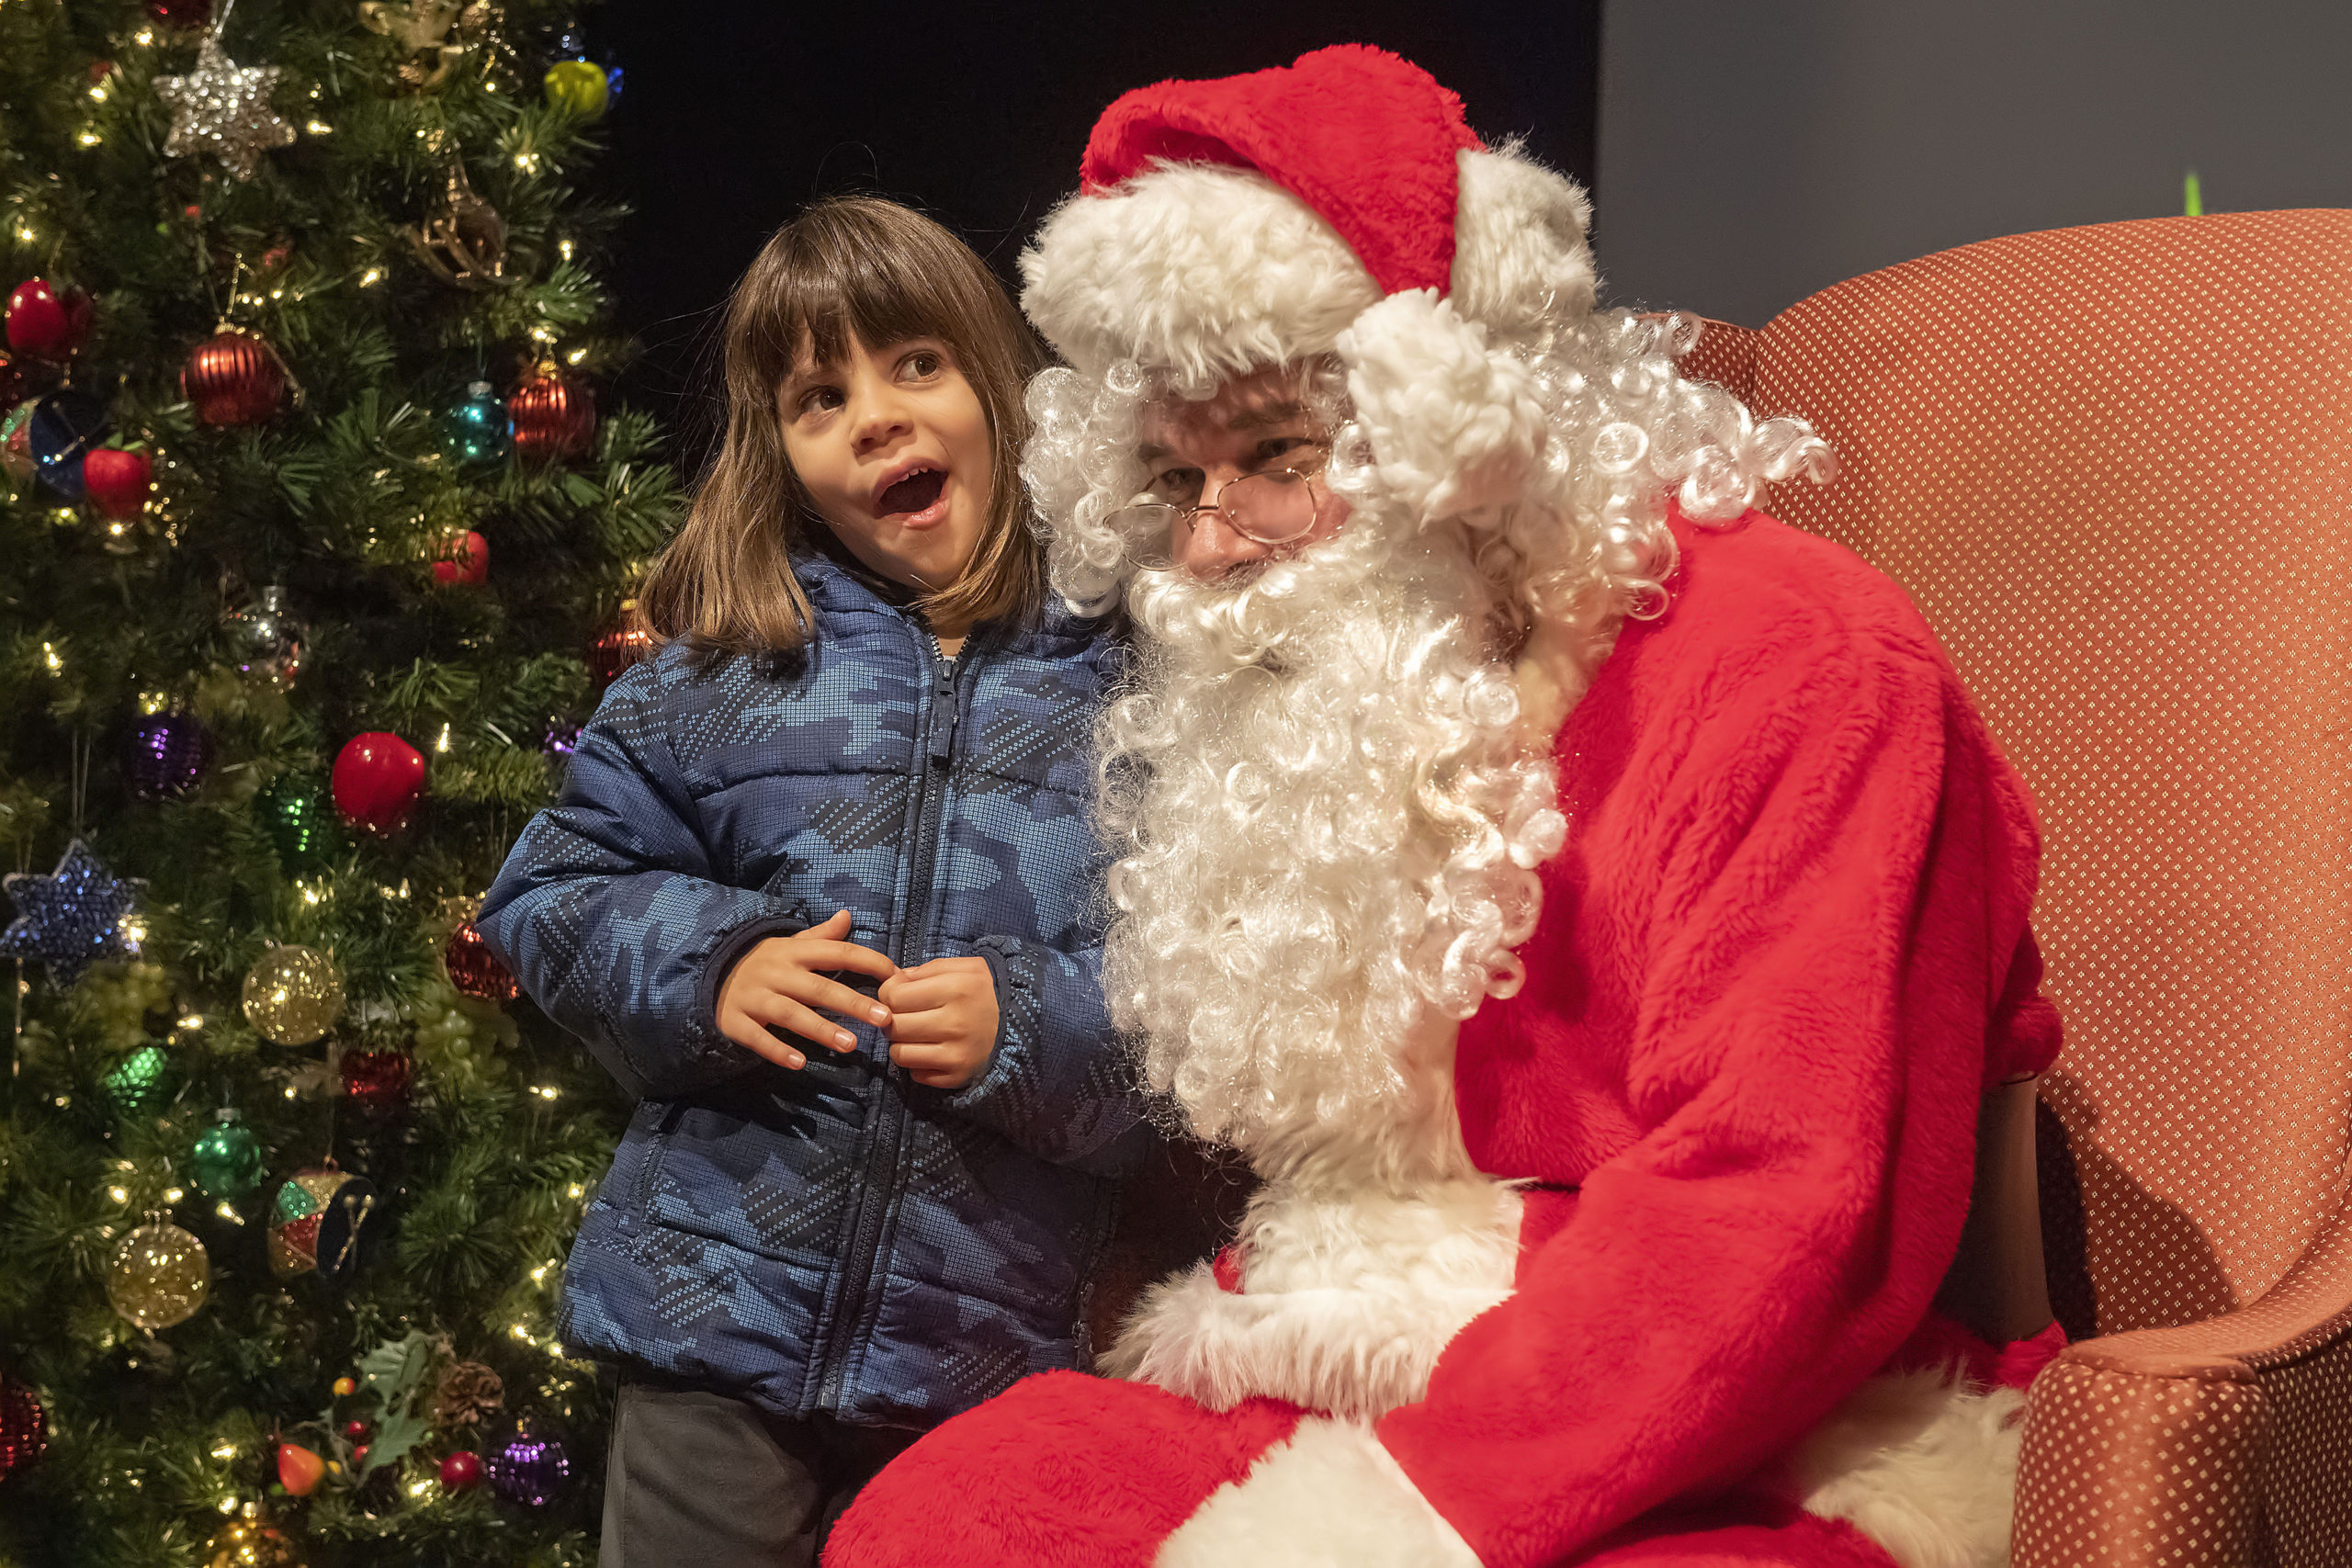 Five-year-old Carlotta Rodriguez ponders her answer anfter being asked by Santa Claus what she wants for Christmas during a Meet Santa event at the Southampton Cultural Center following the Parade of Lights, Tree-Lighting and Fireworks at Agawam Park on Saturday night.    MICHAEL HELLER